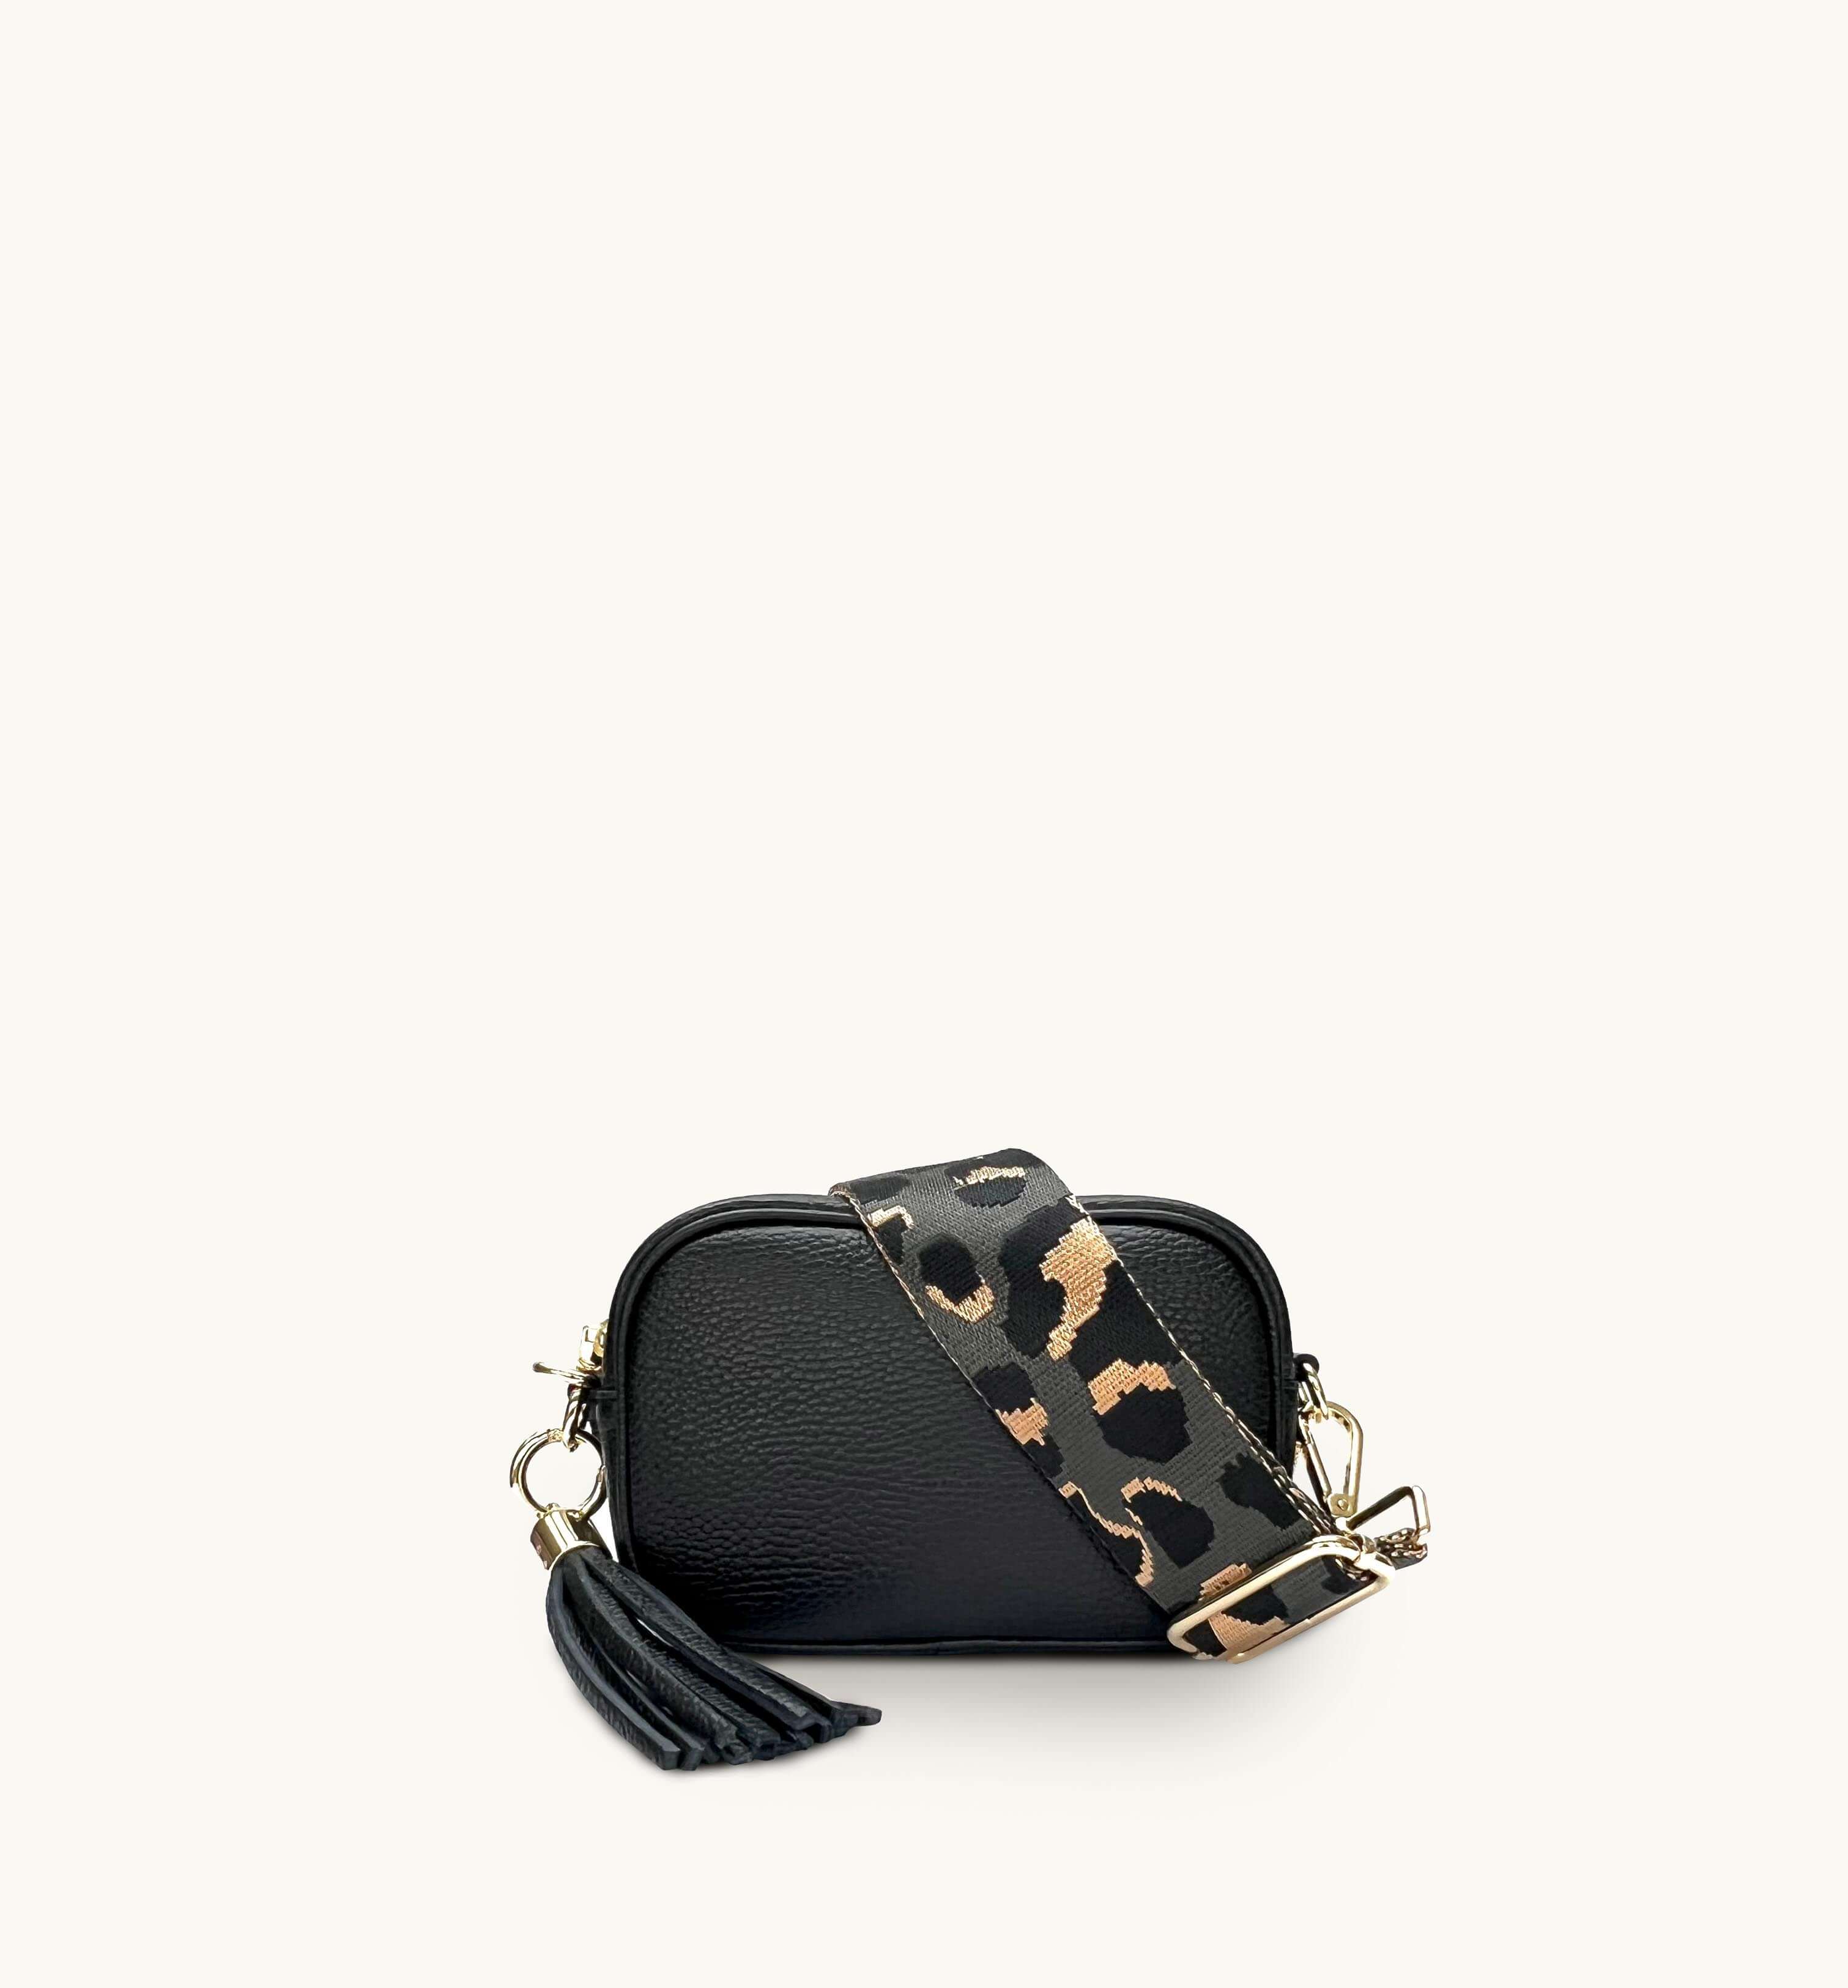 Apatchy Mini Black Leather Phone Bag With Grey Leopard Strap